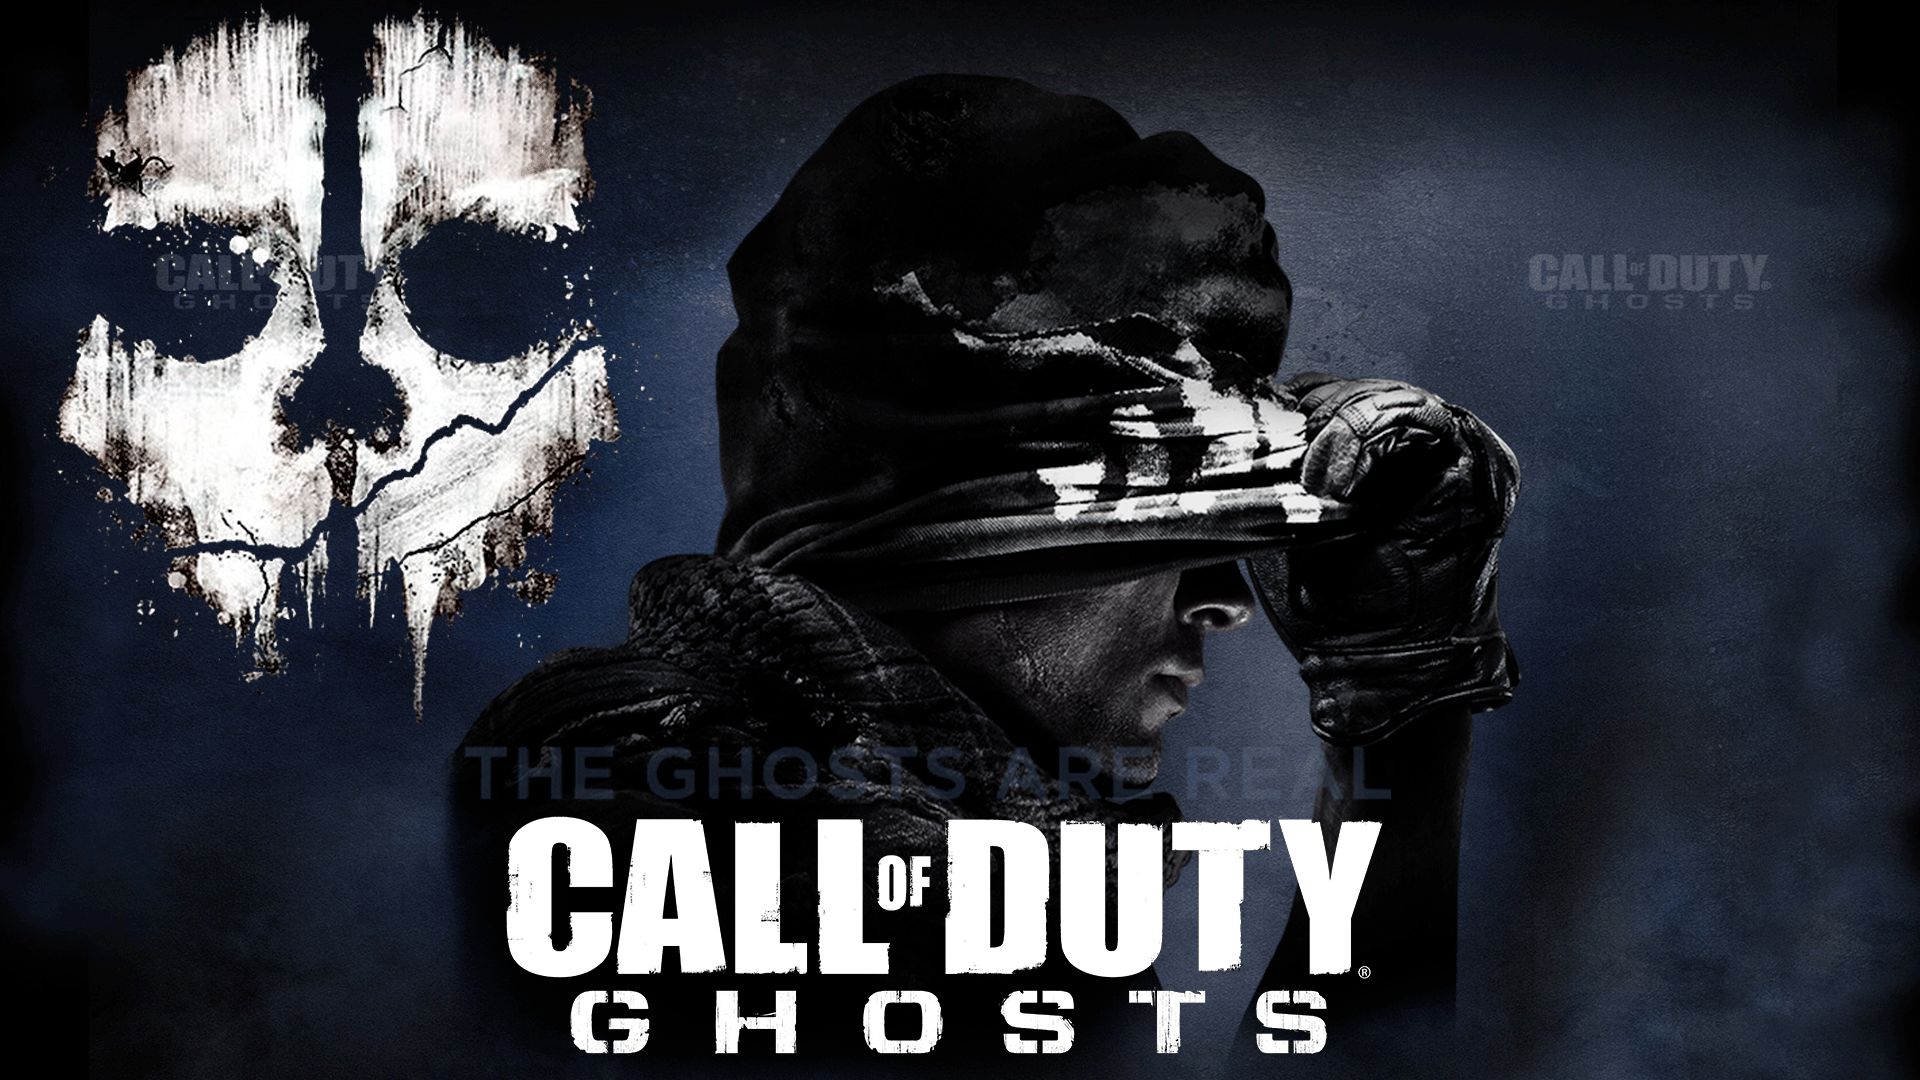 Wallpaper Call of Duty Ghosts Deluxe Edition game shooter CoD Ghosts  screenshot 4k 5k PS4 Xbox One PC Games 3816